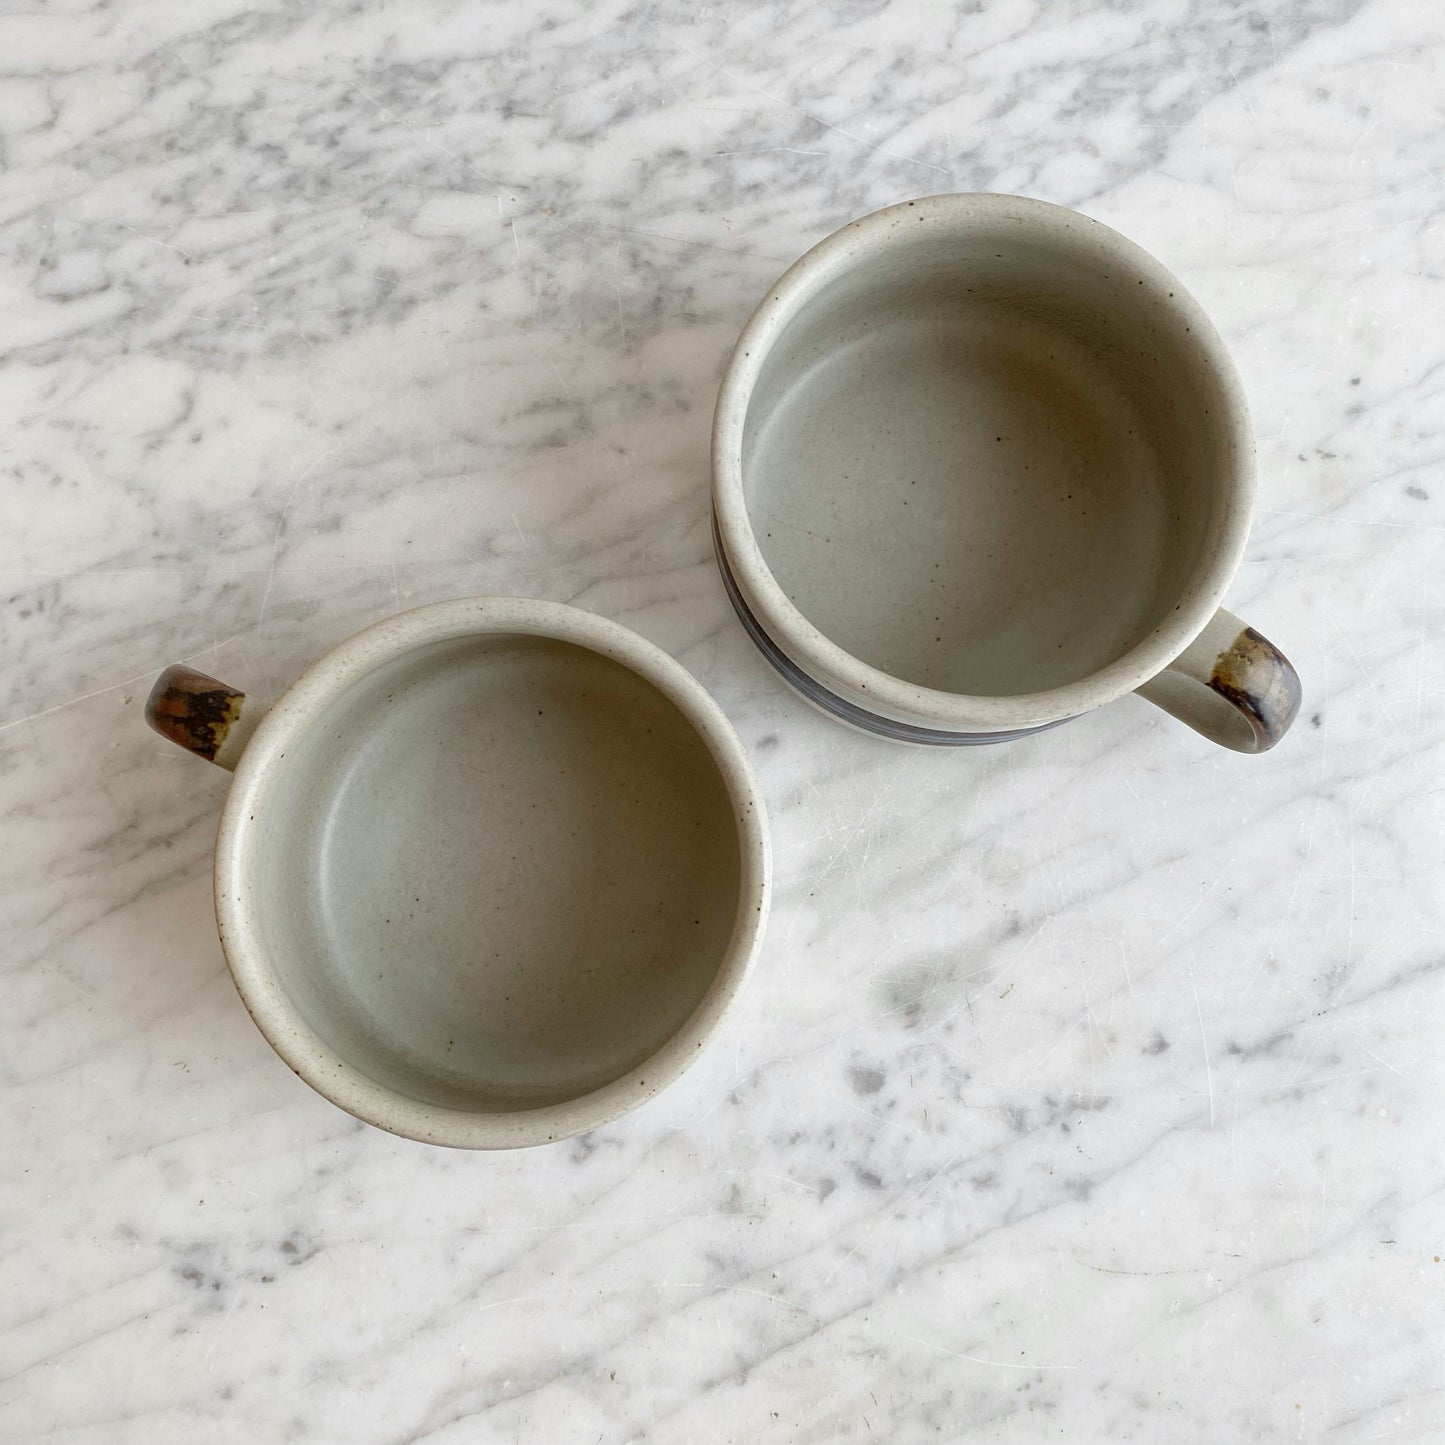 Pair of Vintage Pottery Soup Mugs